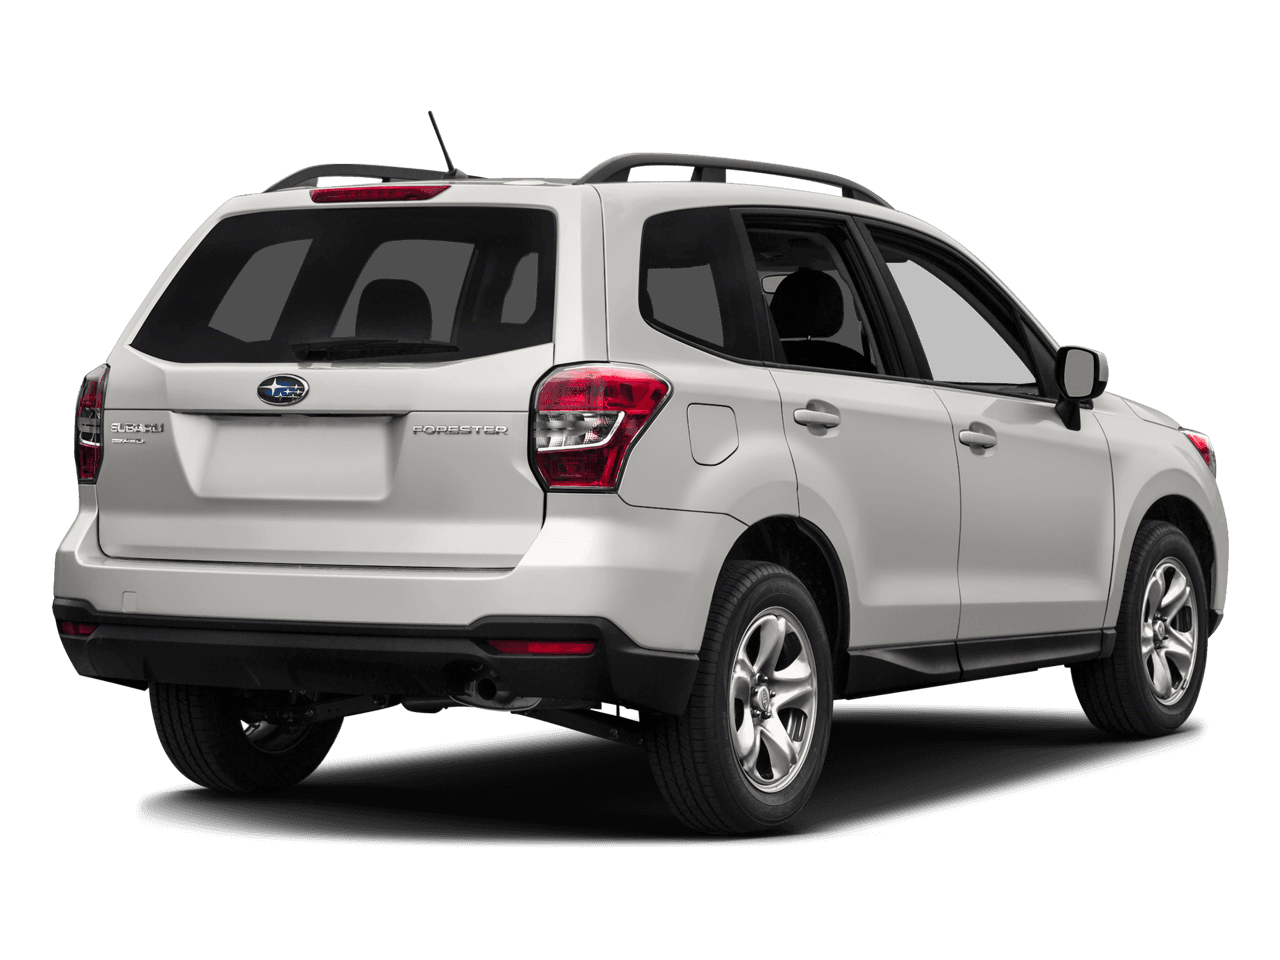 2016 Subaru Forester Photo in Bethesda, MD 20814